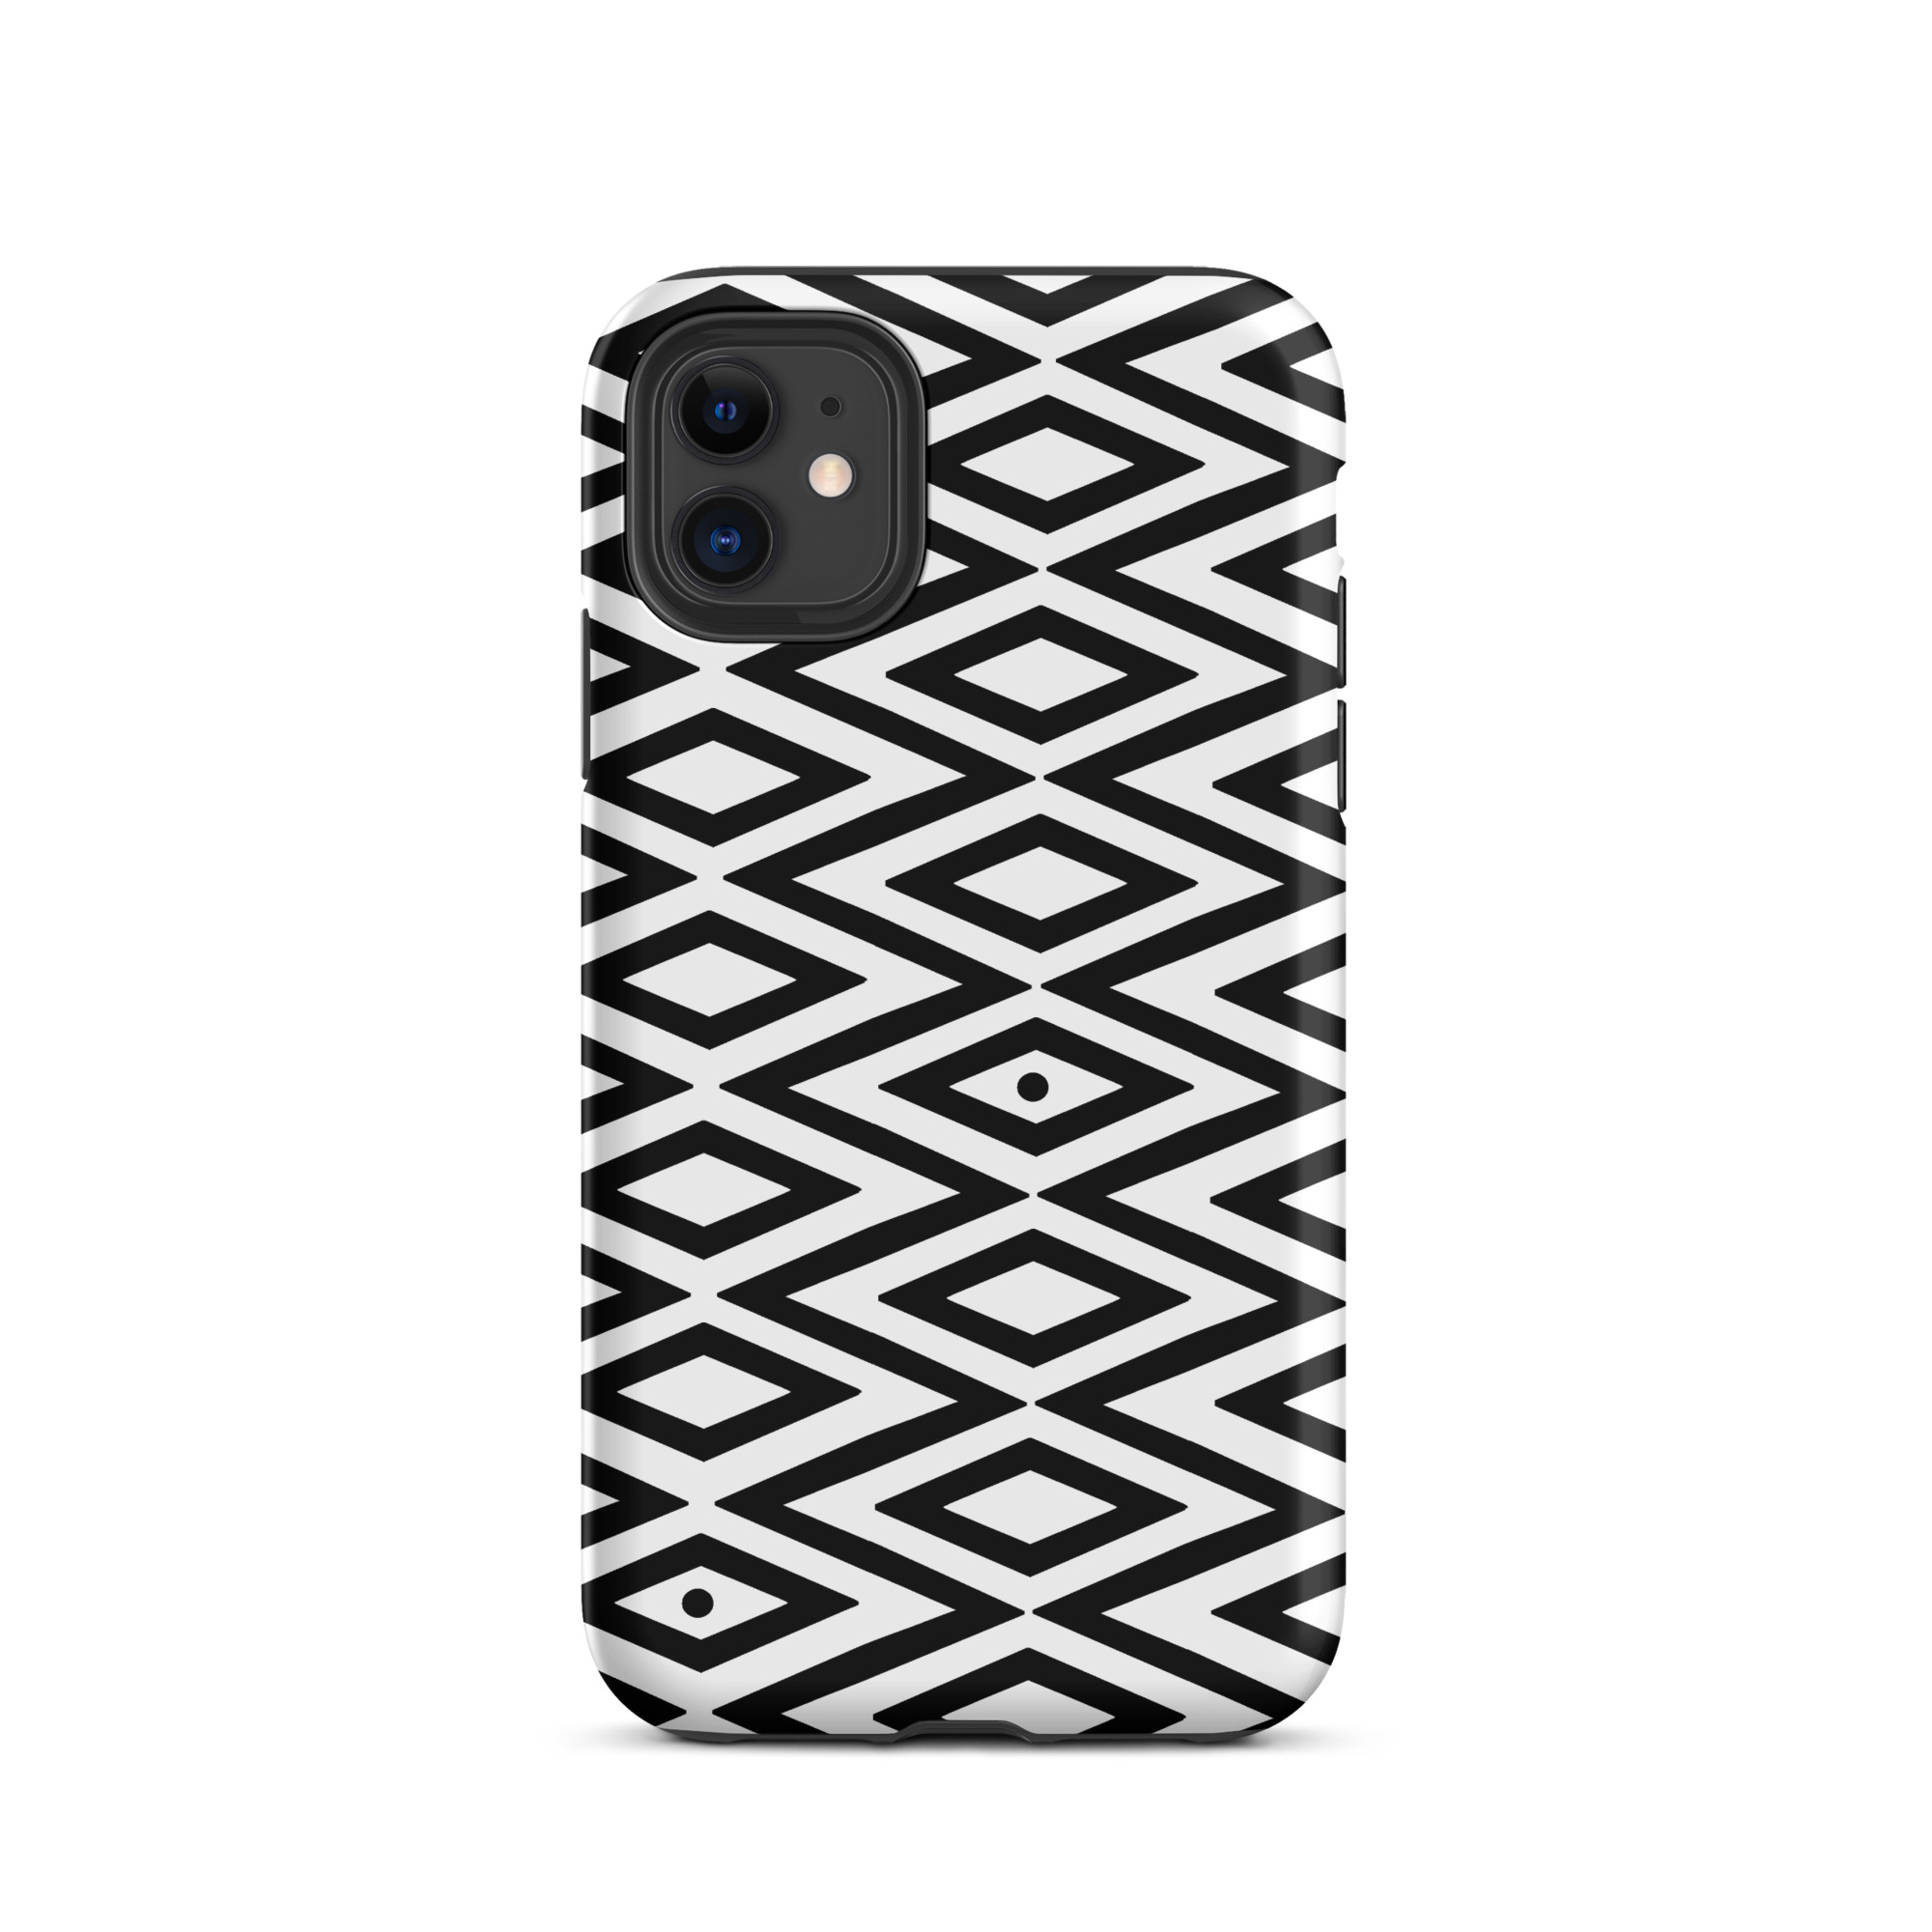 tough-iphone-case-glossy-iphone-11-front-632475a7ea3c1.jpg